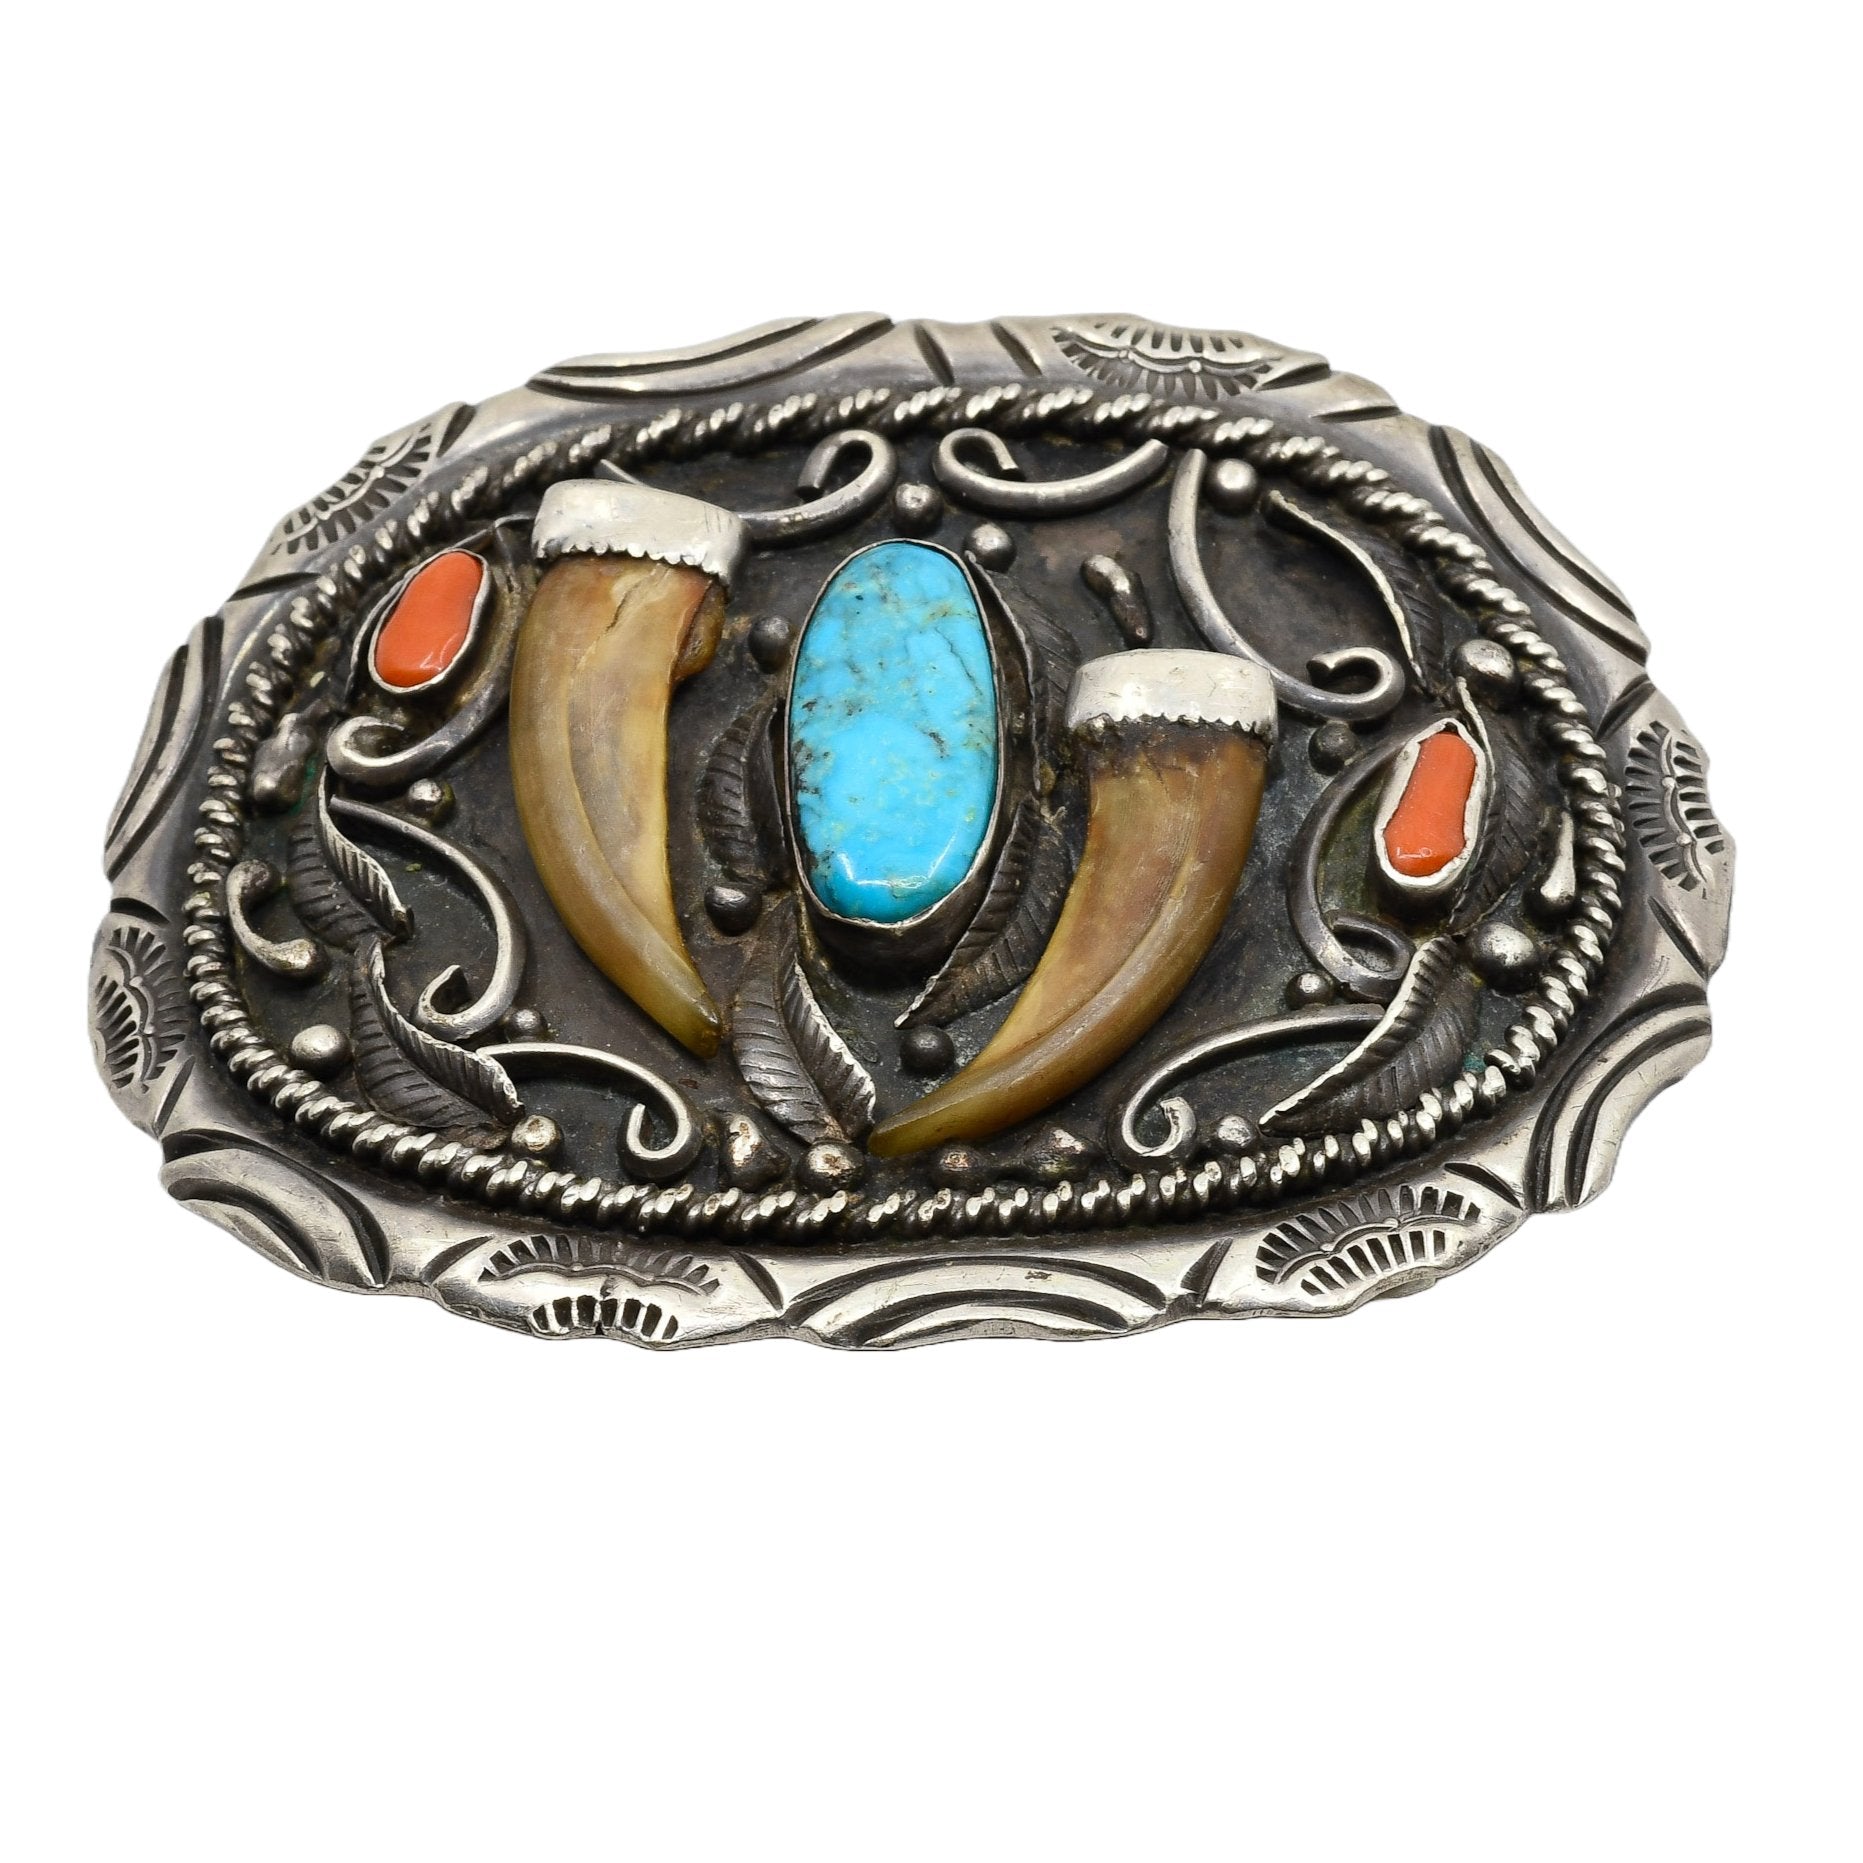 Vintage Bear Claw Buckle With Turquoise and Silver